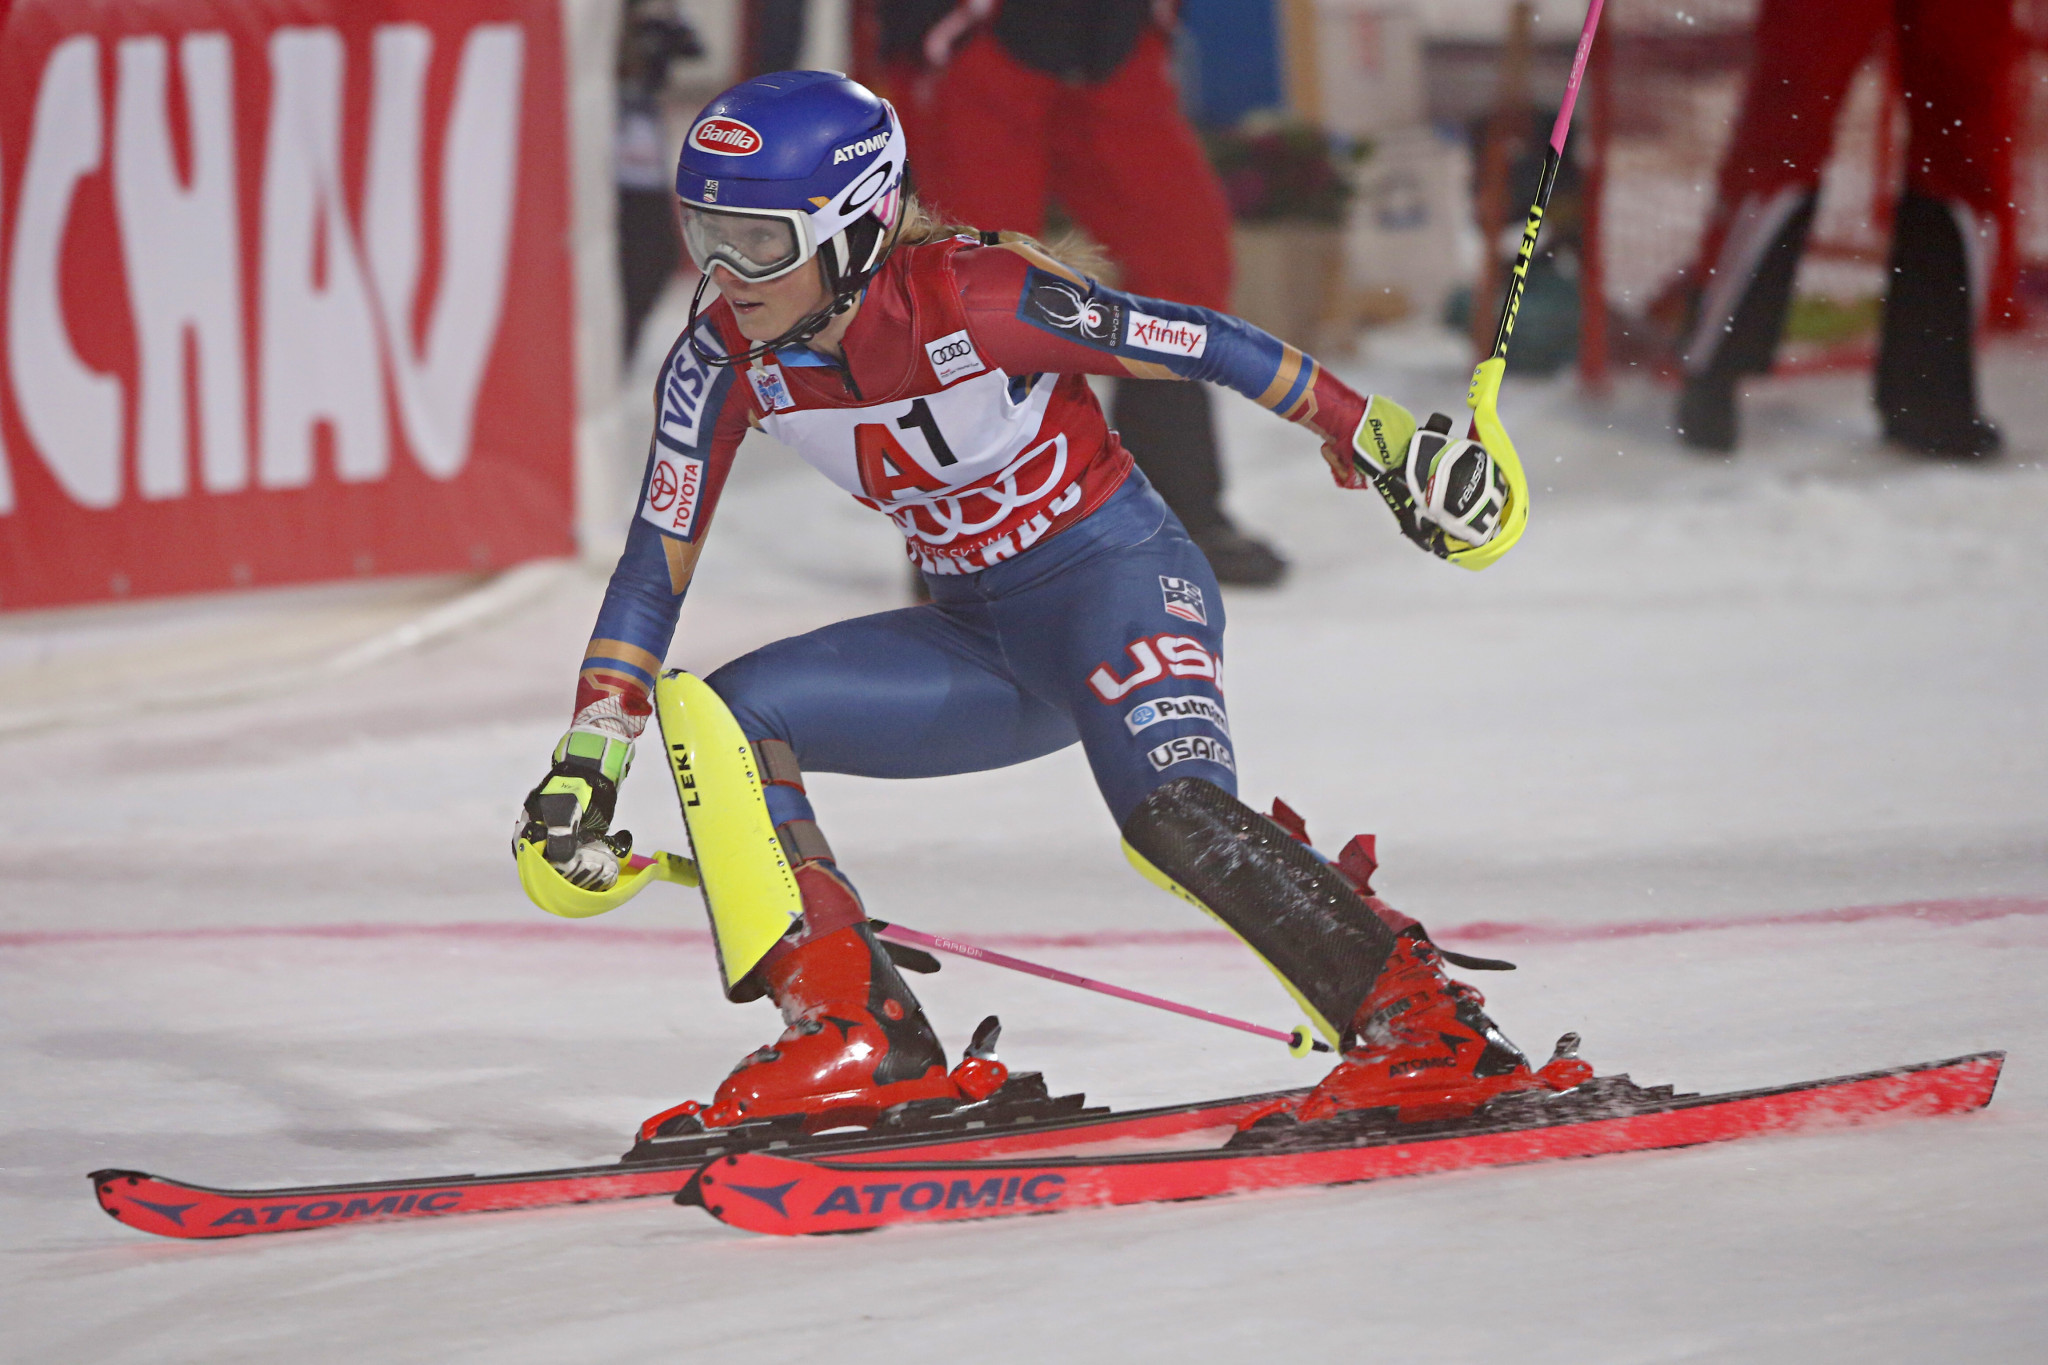 Shiffrin on verge of breaking record as she wins in FIS Alpine Skiing World Cup